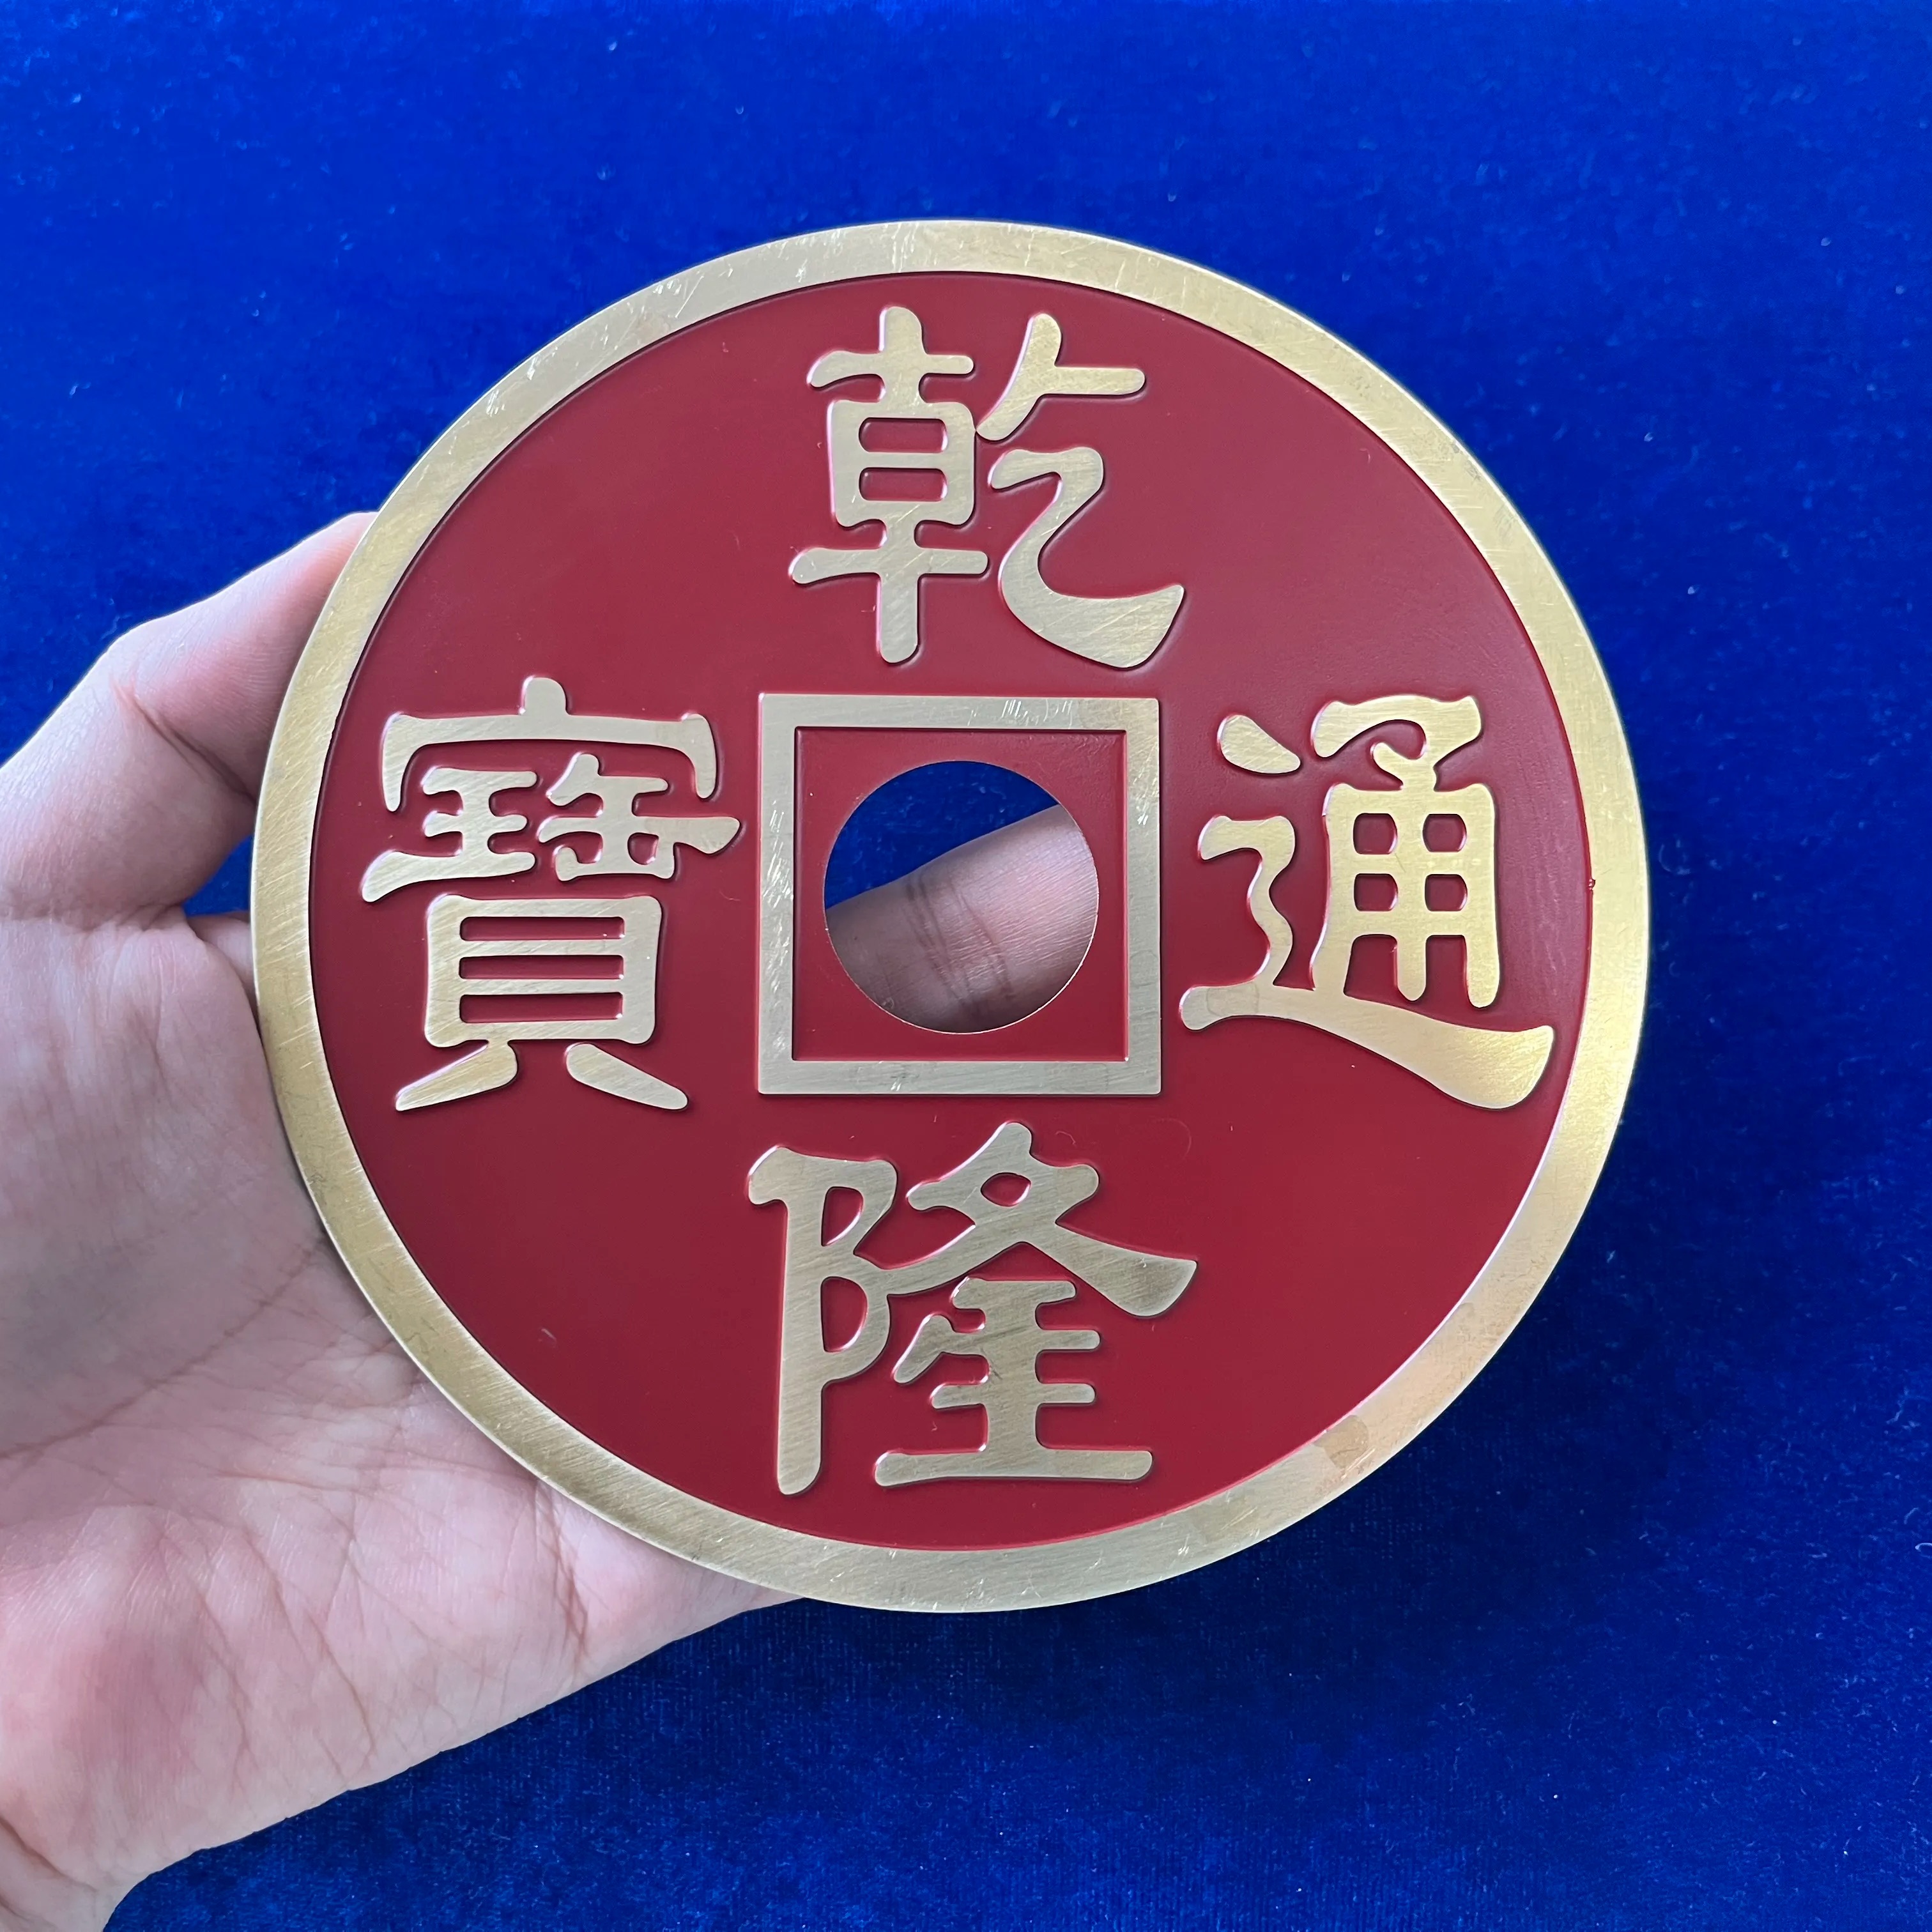 Super Jumbo Chinese Coin by N2G-N2G Presents